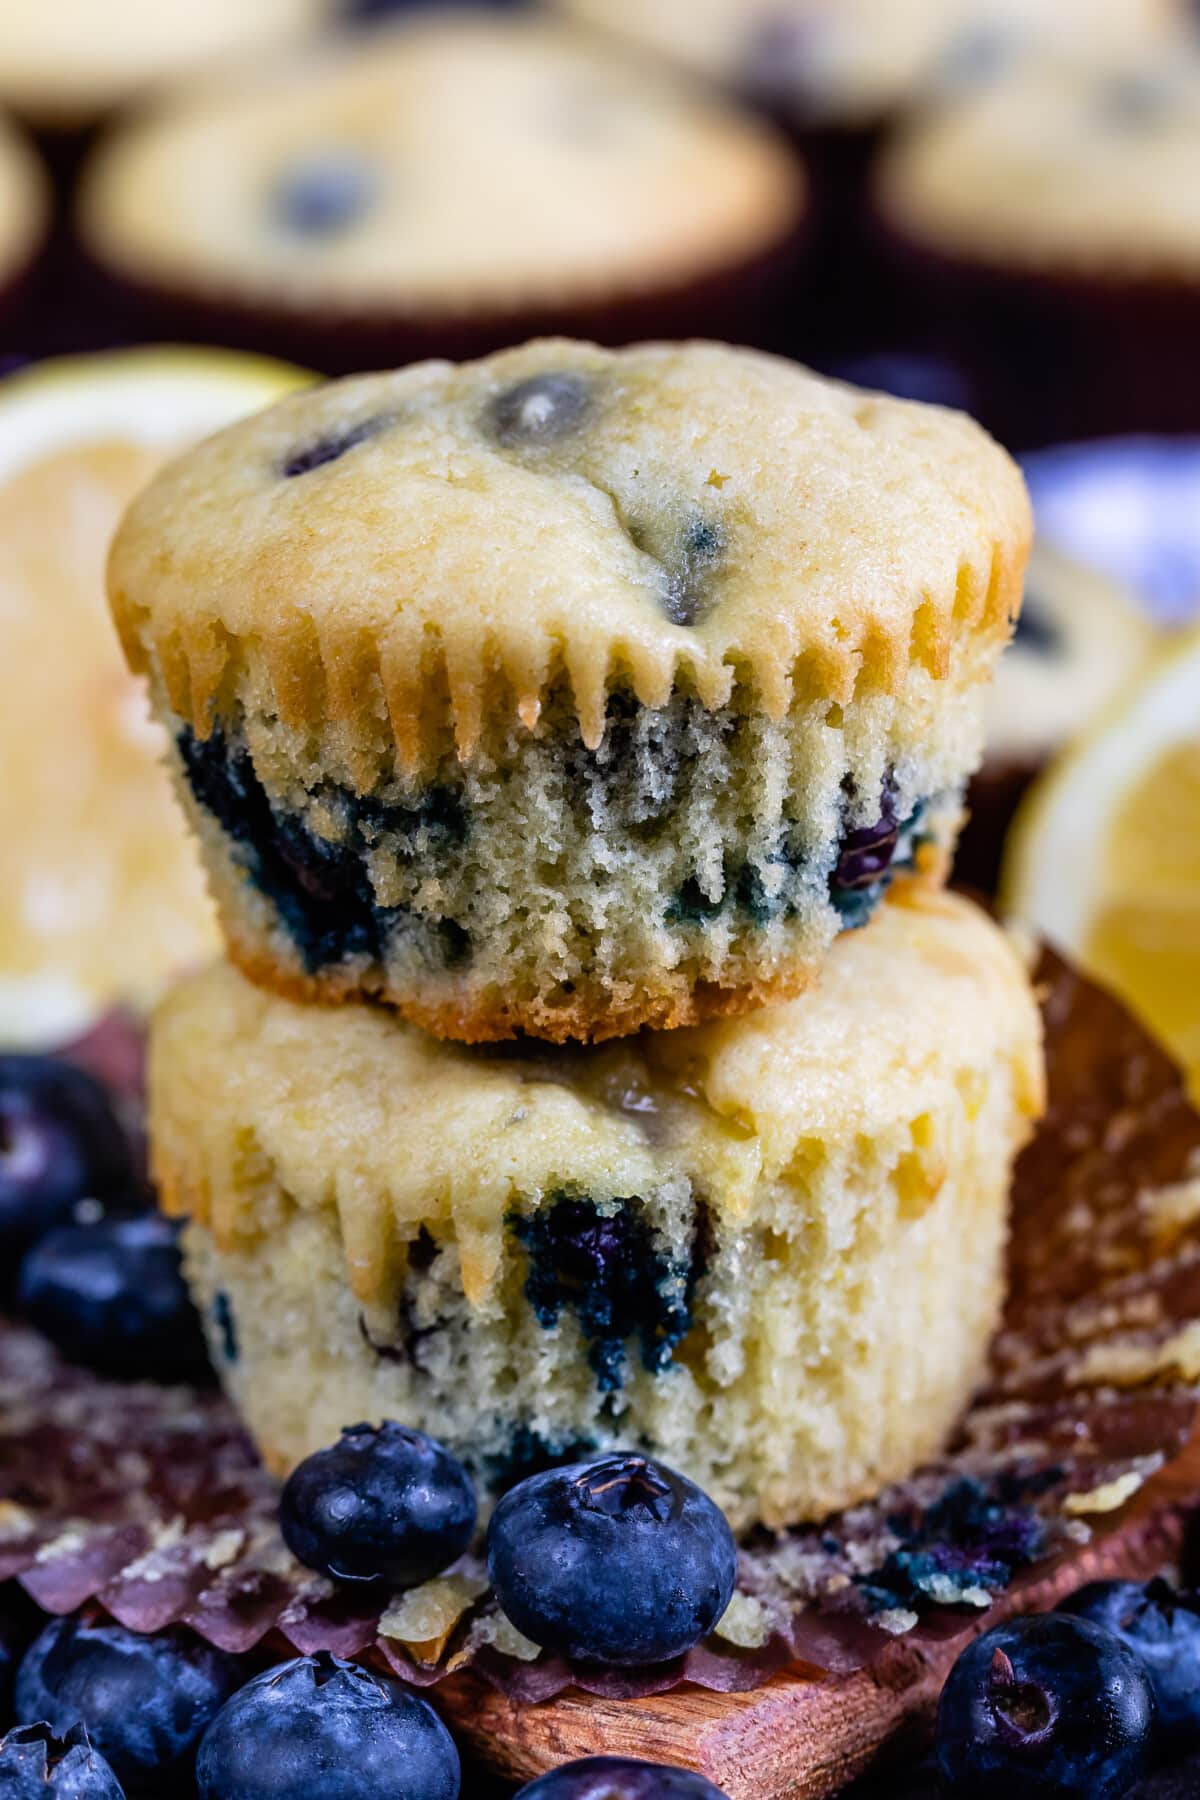 muffins with blueberries baked in.